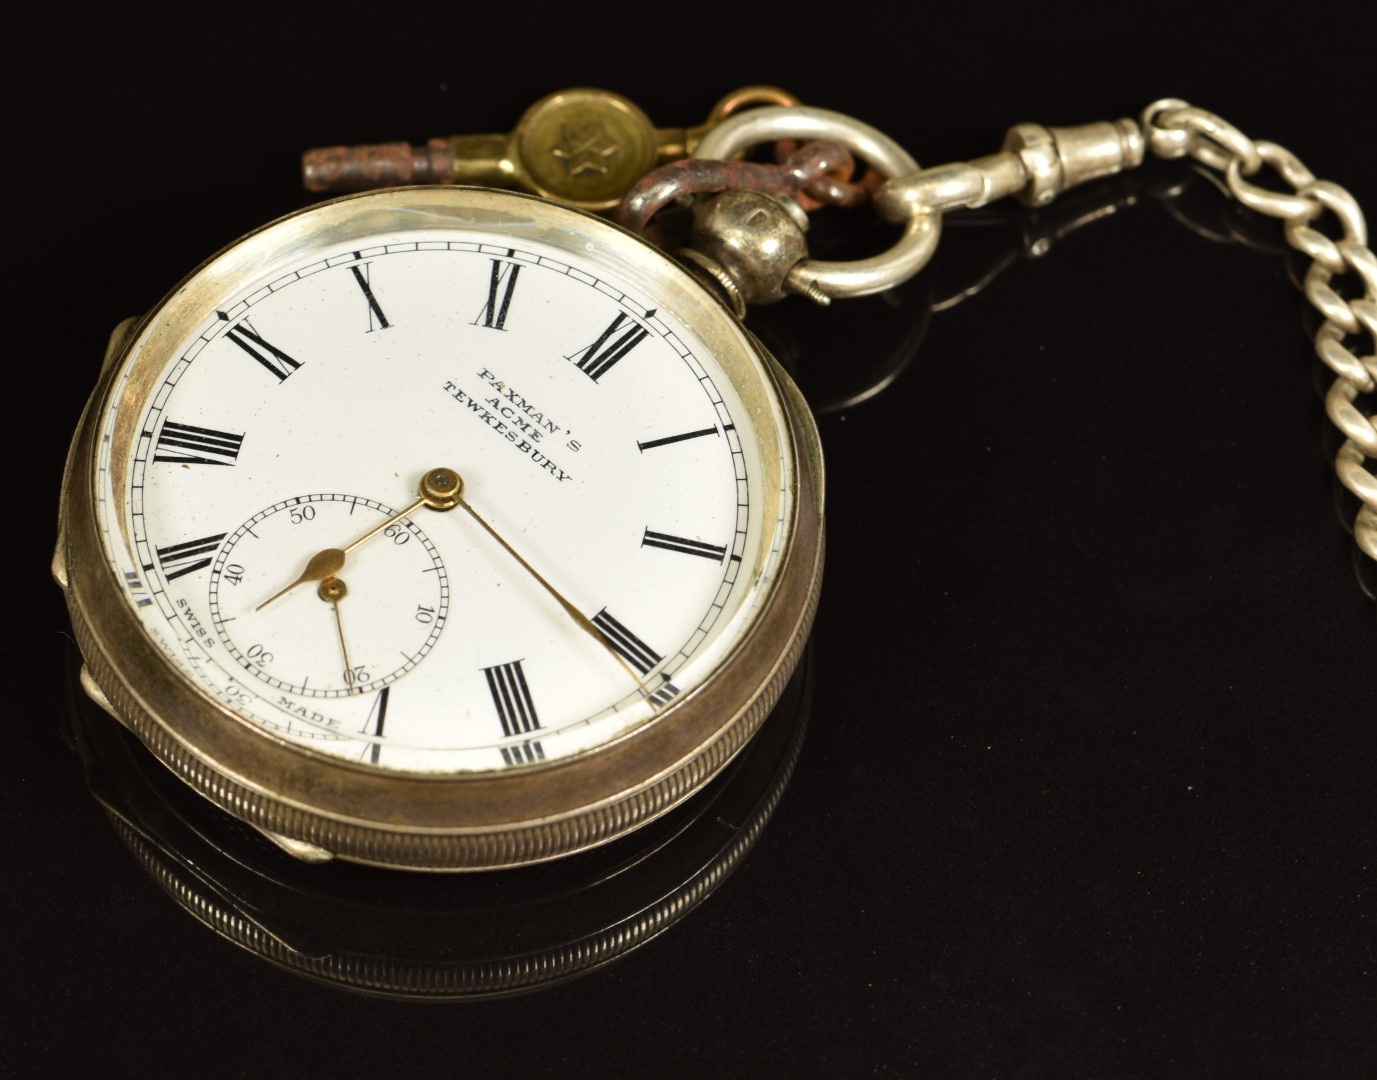 Two open faced pocket watches Paxman's Acme of Tewksbury silver example on silver chain with fob and - Image 2 of 5